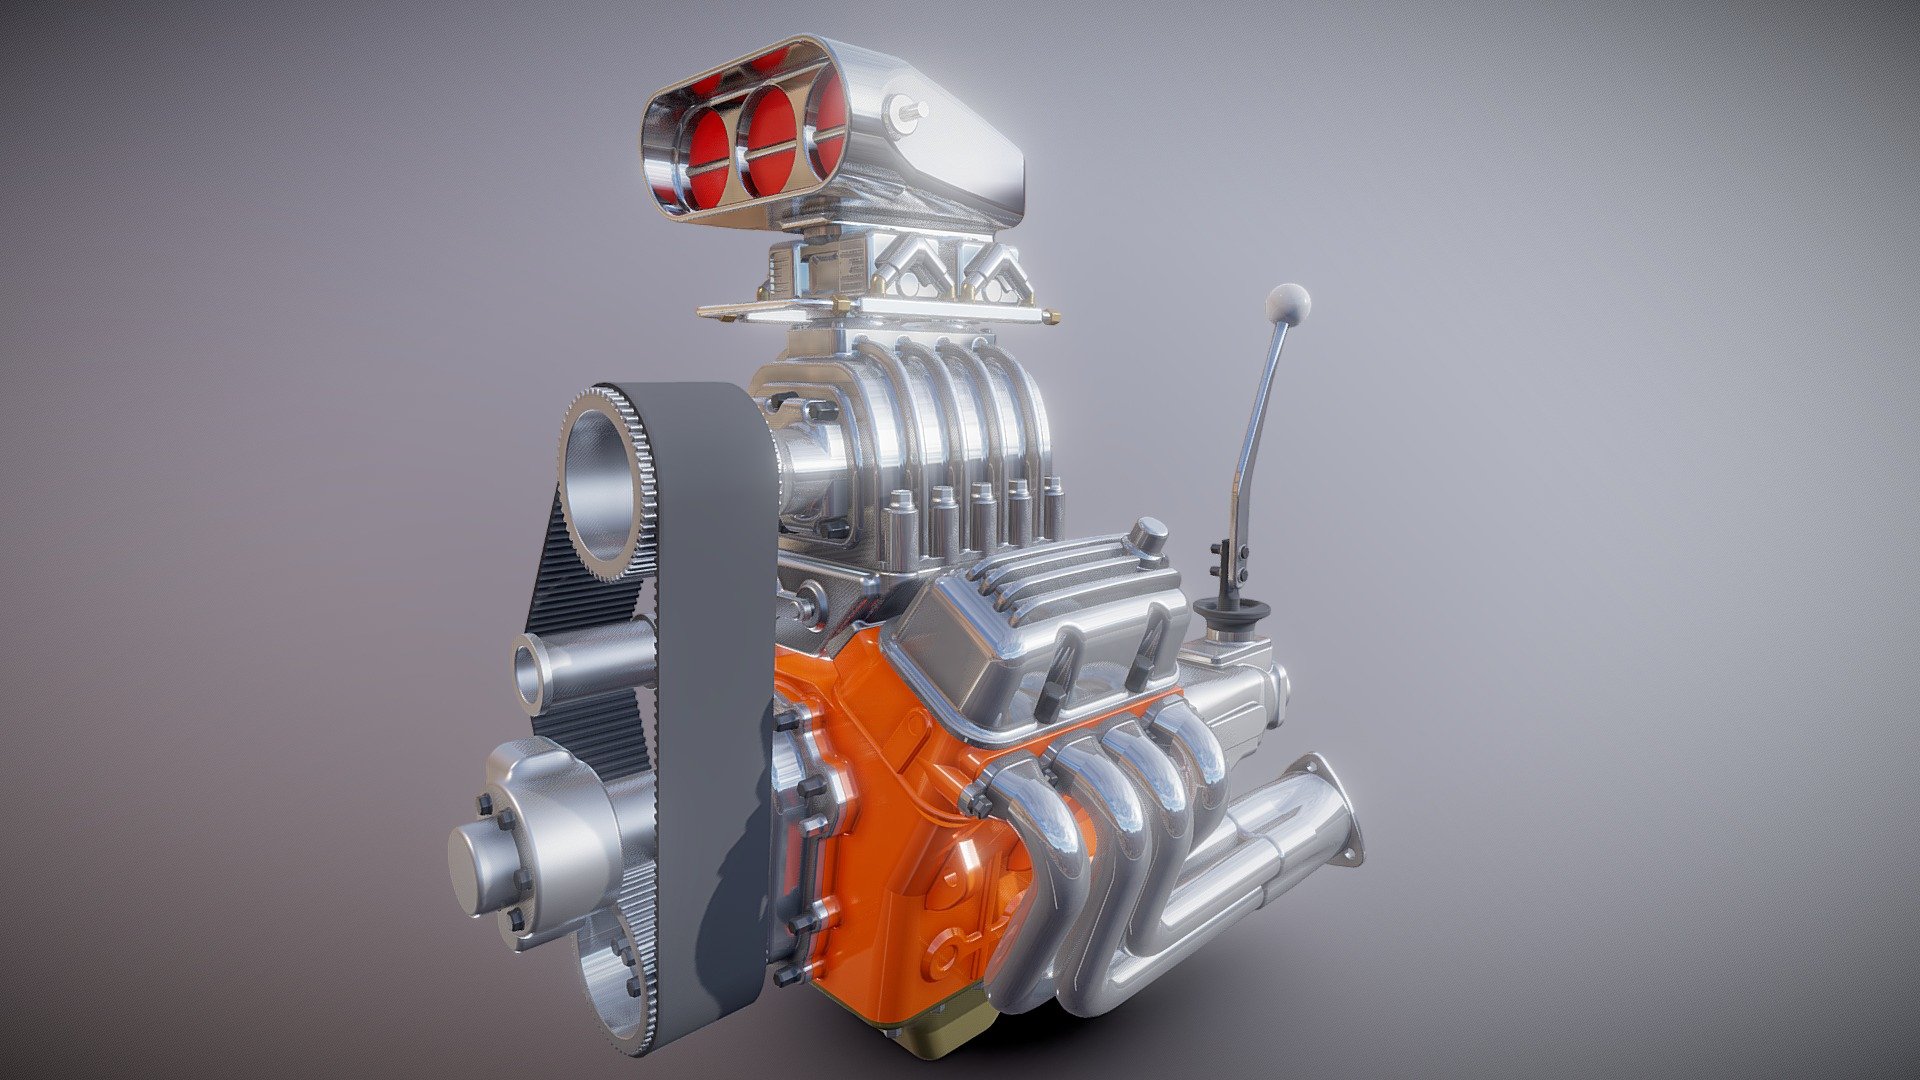 Cartoon V8 HotRod engine. 
parts list - 
Small block.
Heads.
Chrome finned head covers.
Blower.
2x4 carbs.
Transmission.
Hurst shifter.
Fuel pump.
HotRod exhaust headers.
Classic look air scoop.
Oil pan.
Custom manifold.
Tim cover.
Ignition coil.
Fuel rails 3d model